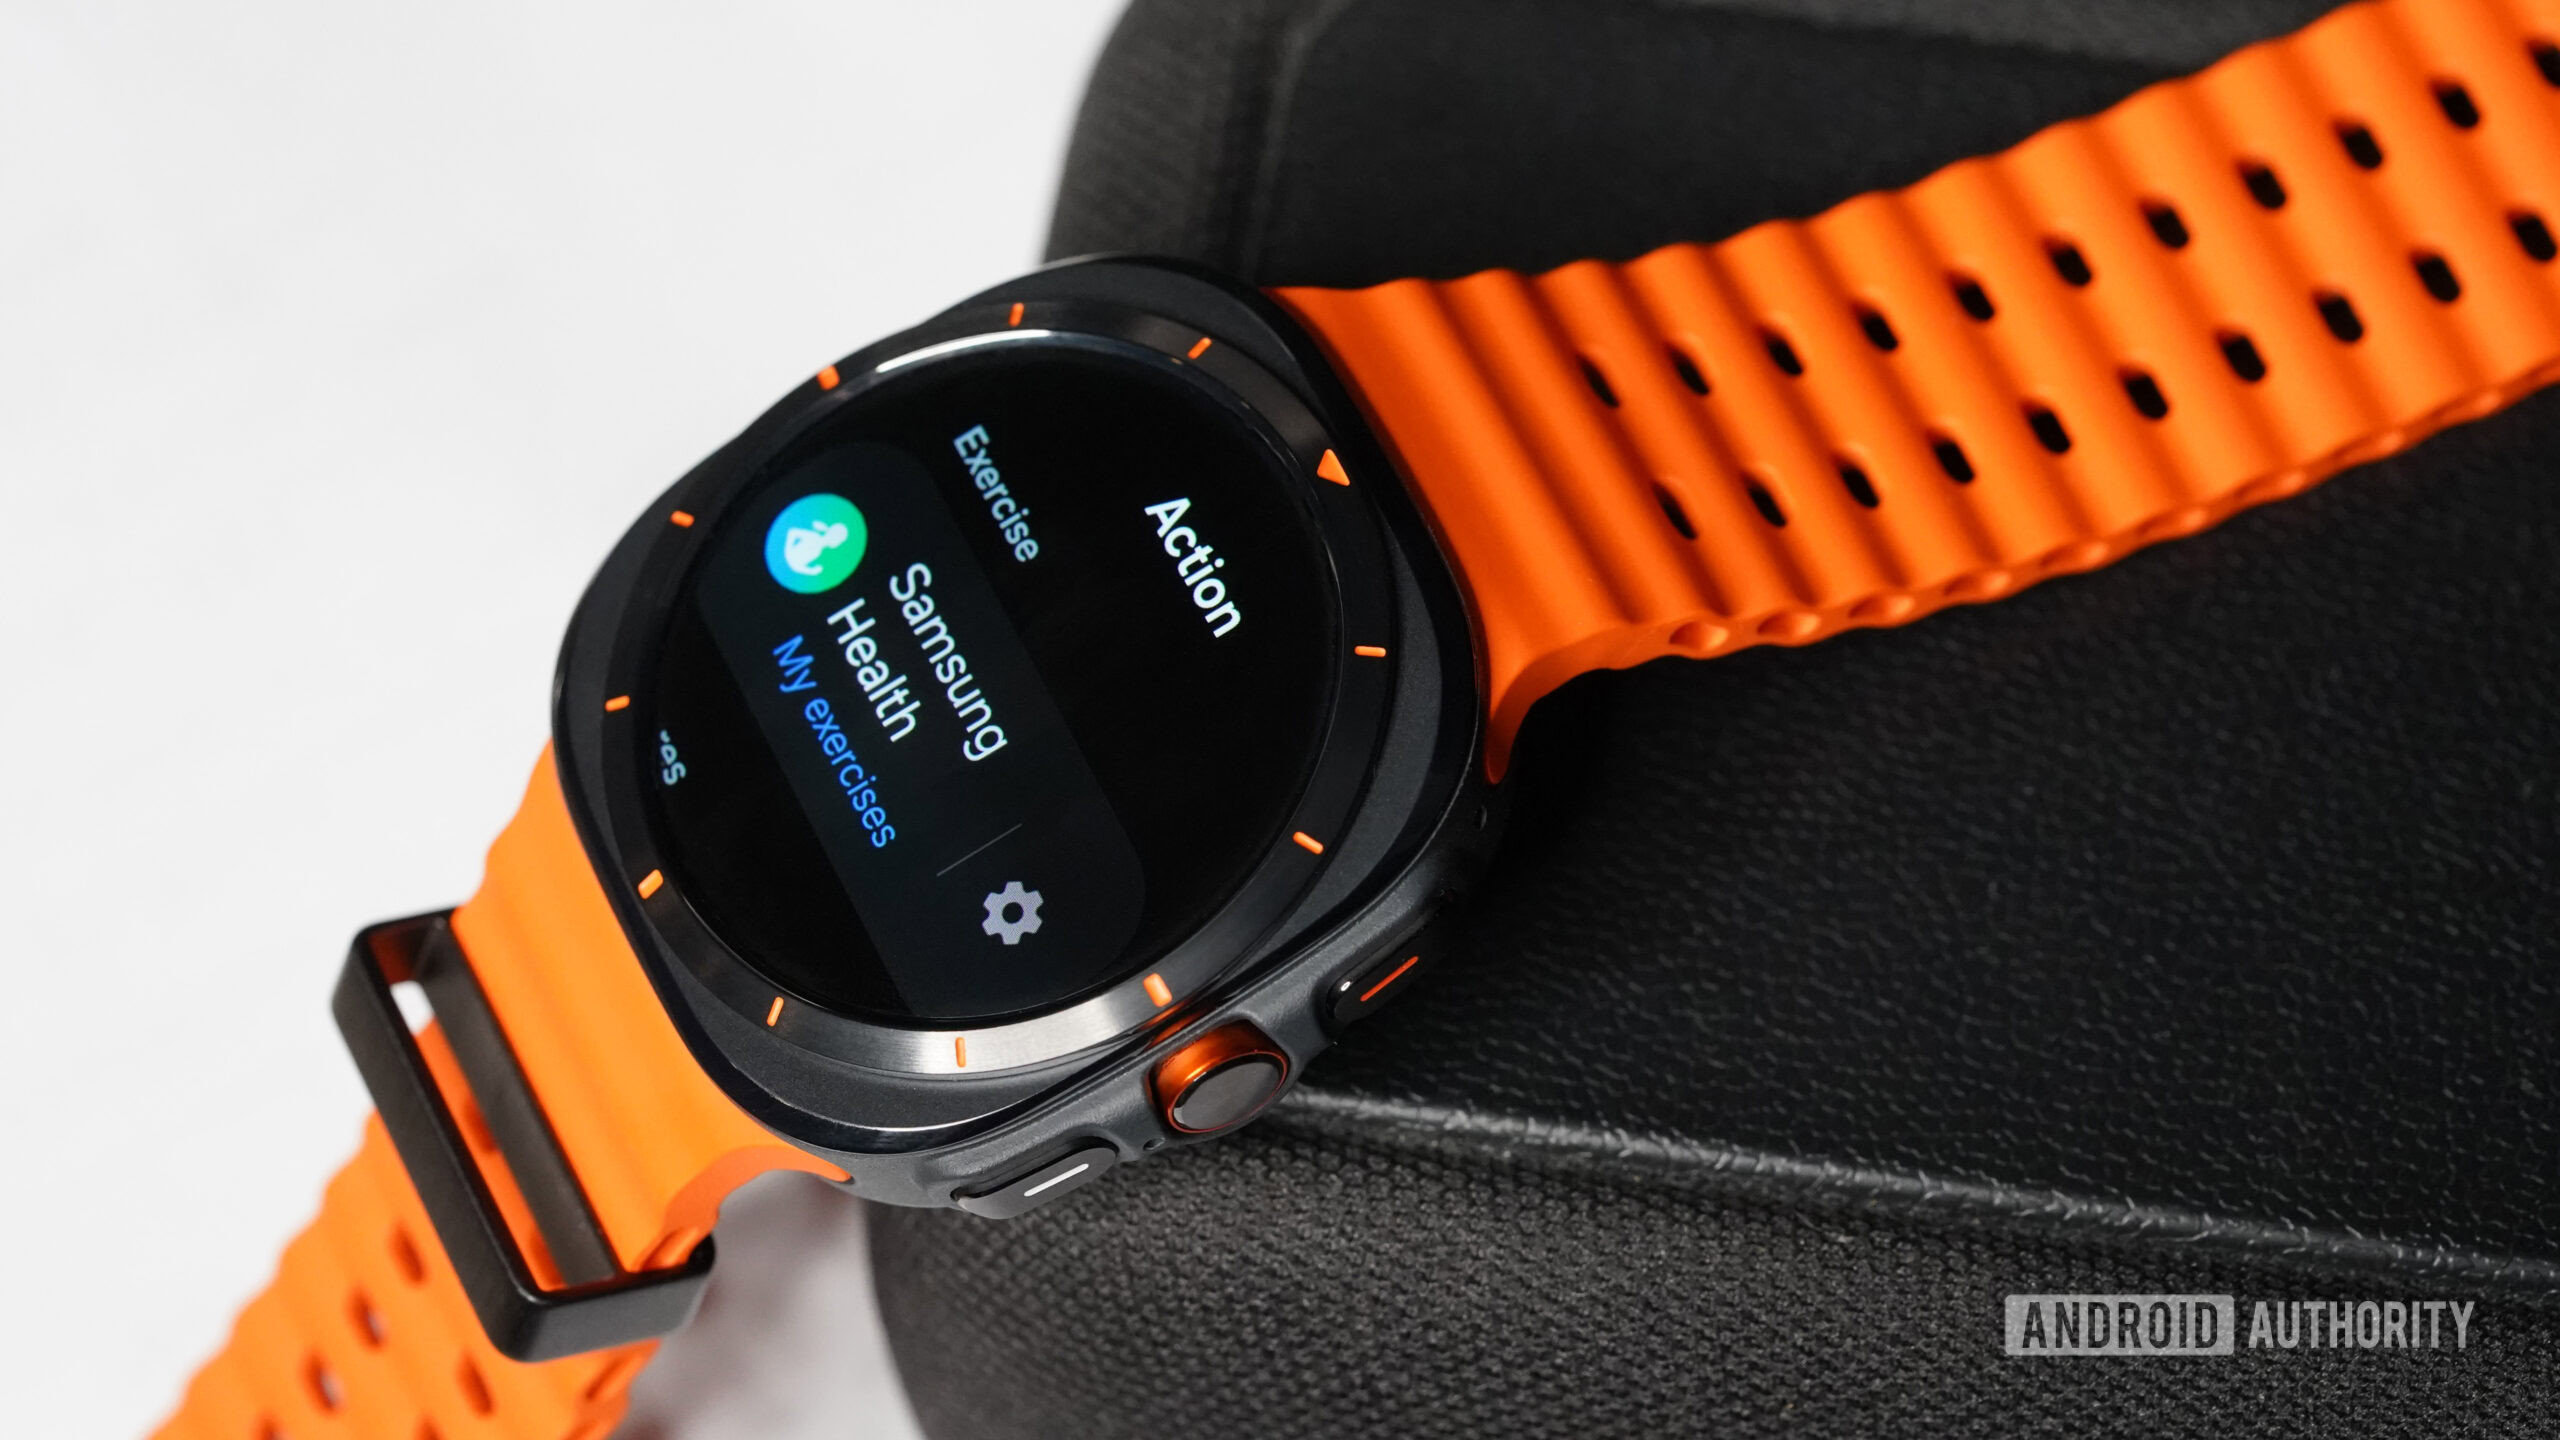 A user reviews the customization options of the Action button on the Samsung Galaxy Watch Ultra.